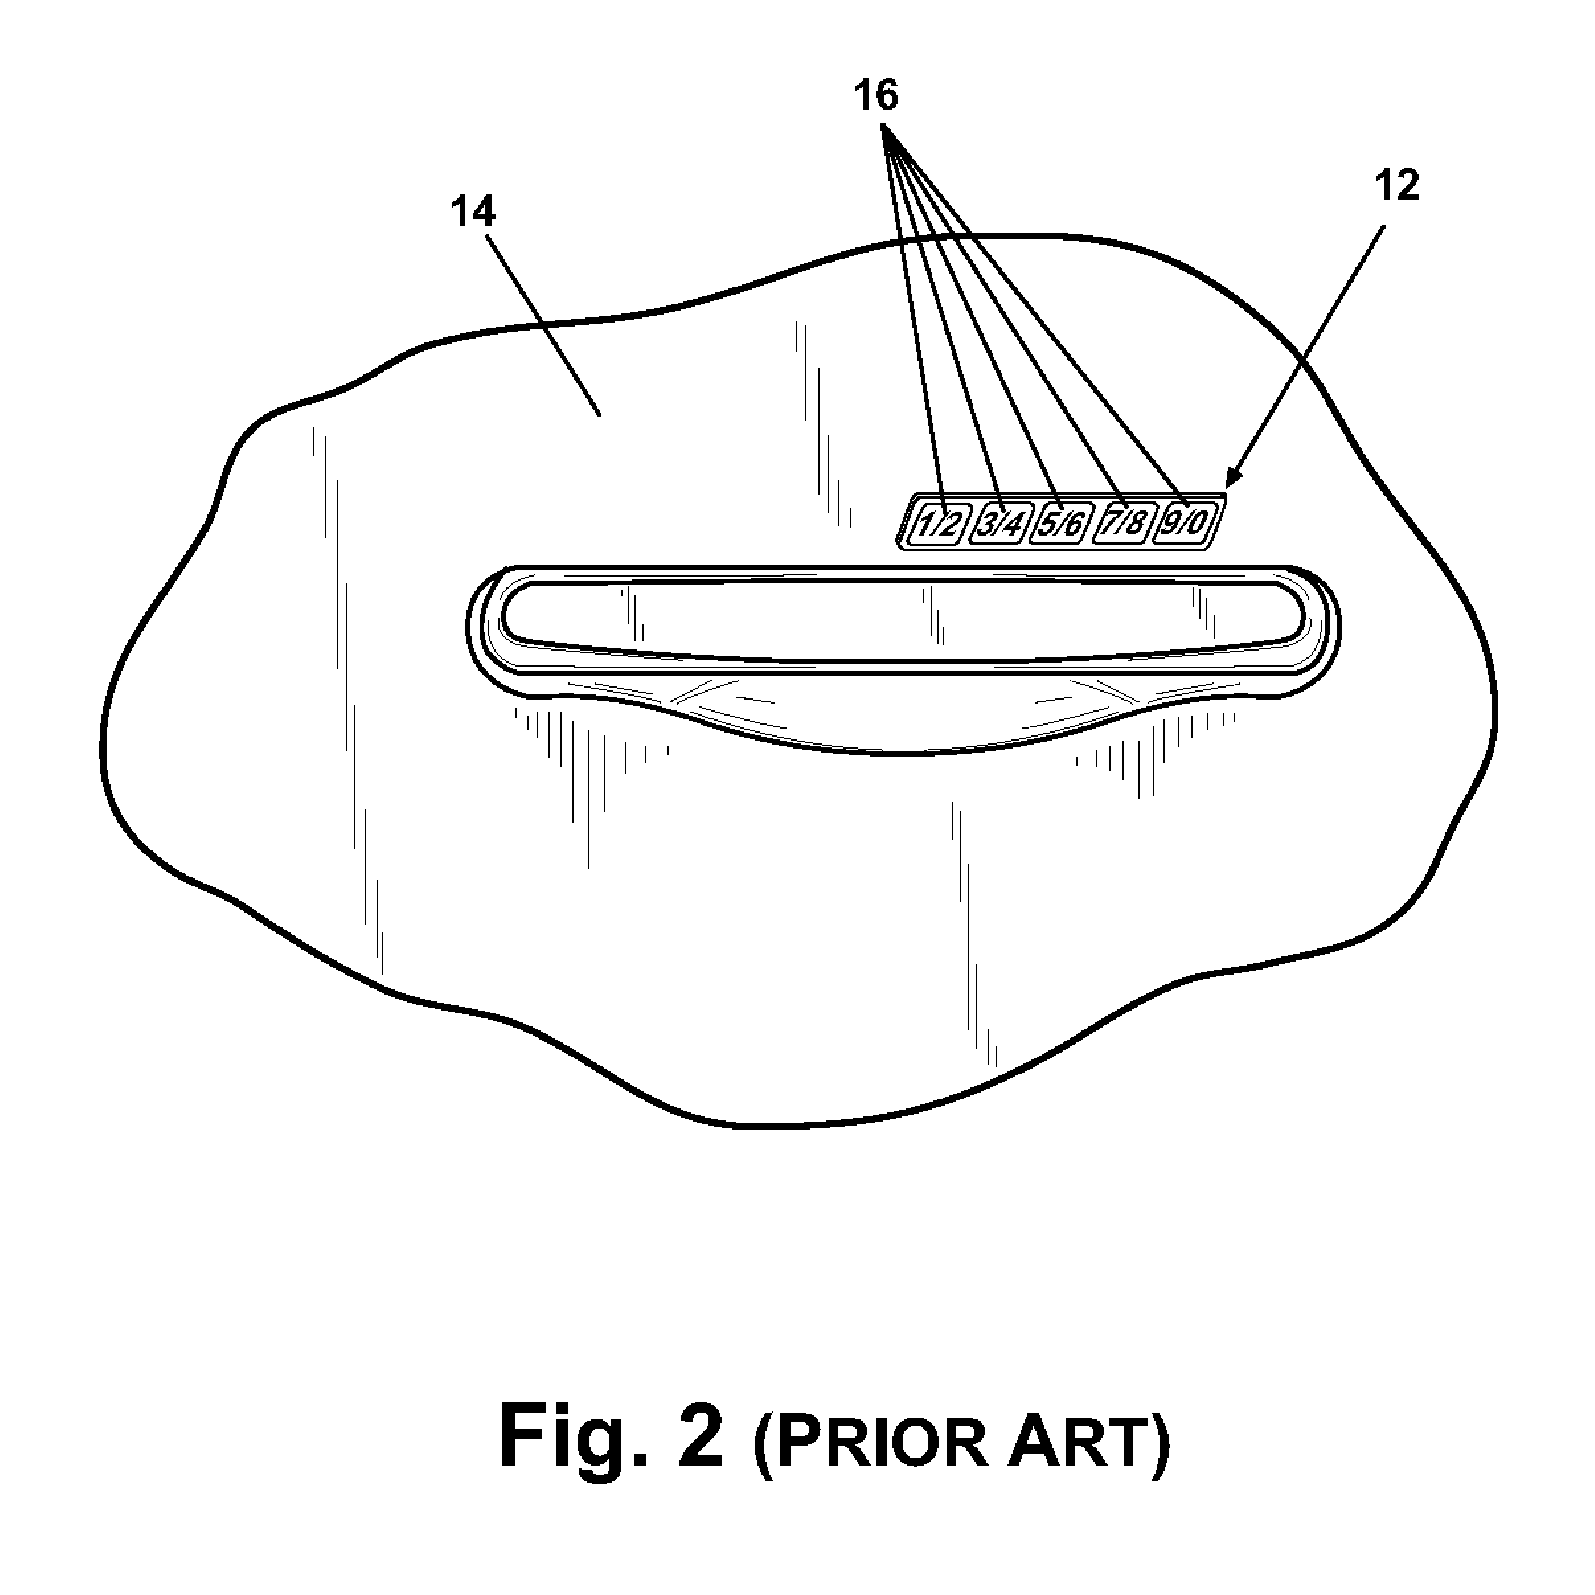 Vehicular keyless entry system incorporating textual representation of the vehicle or user of the vehicle